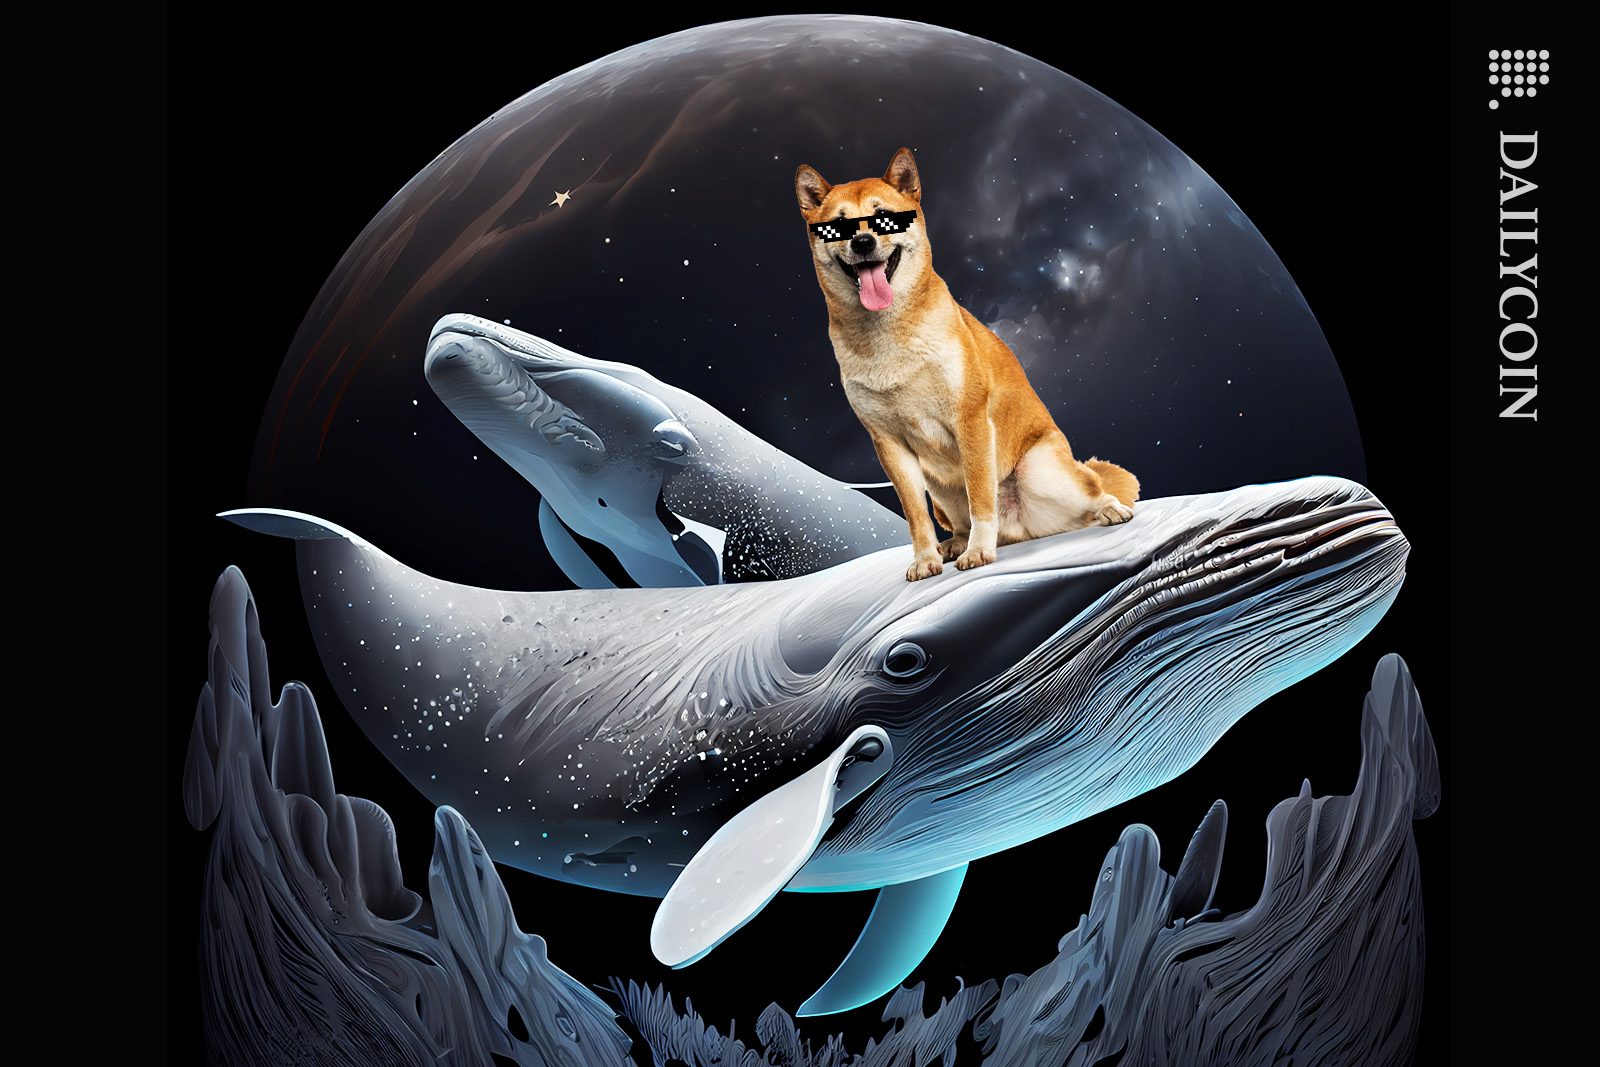 Shiba inu riding on a whale with cool glasses on.